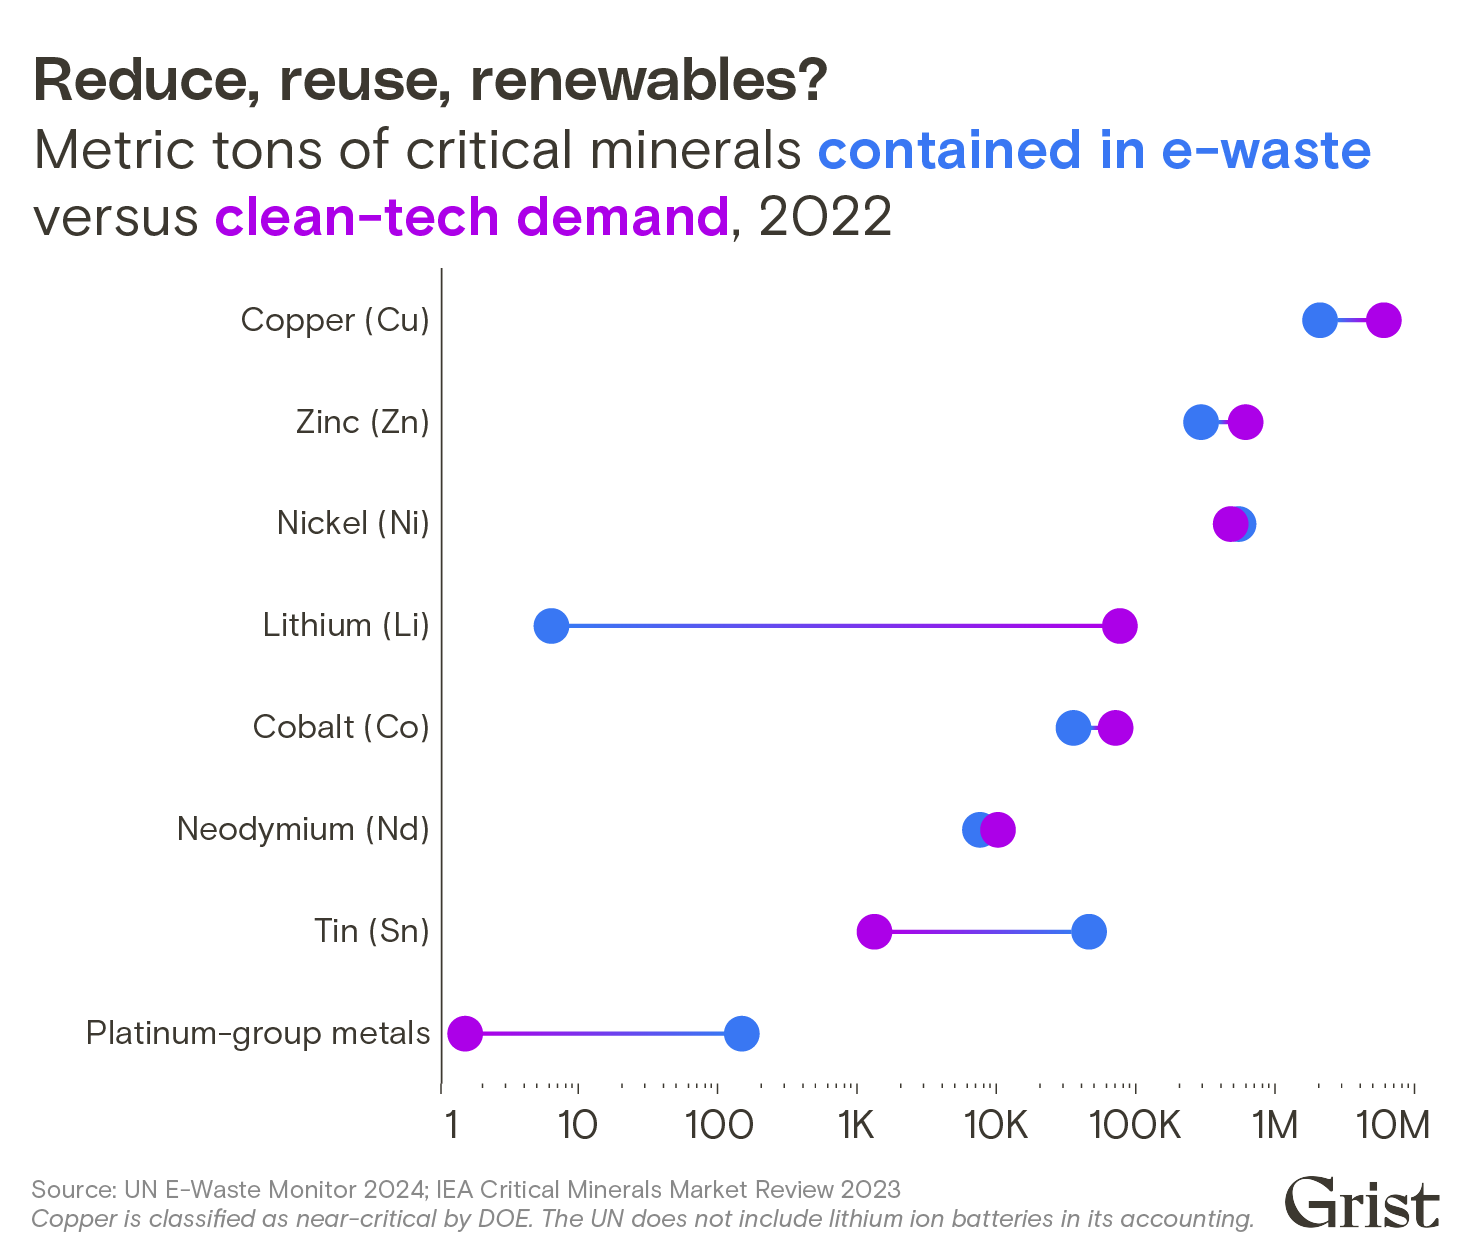 A lollipop chart comparing the metric tons of critical minerals contained in e-waste versus clean-tech demand for those metals as of 2022. In some instances (like copper), e-waste metals can meet a significant component of demand. In others (like platinum), the gap is wide.